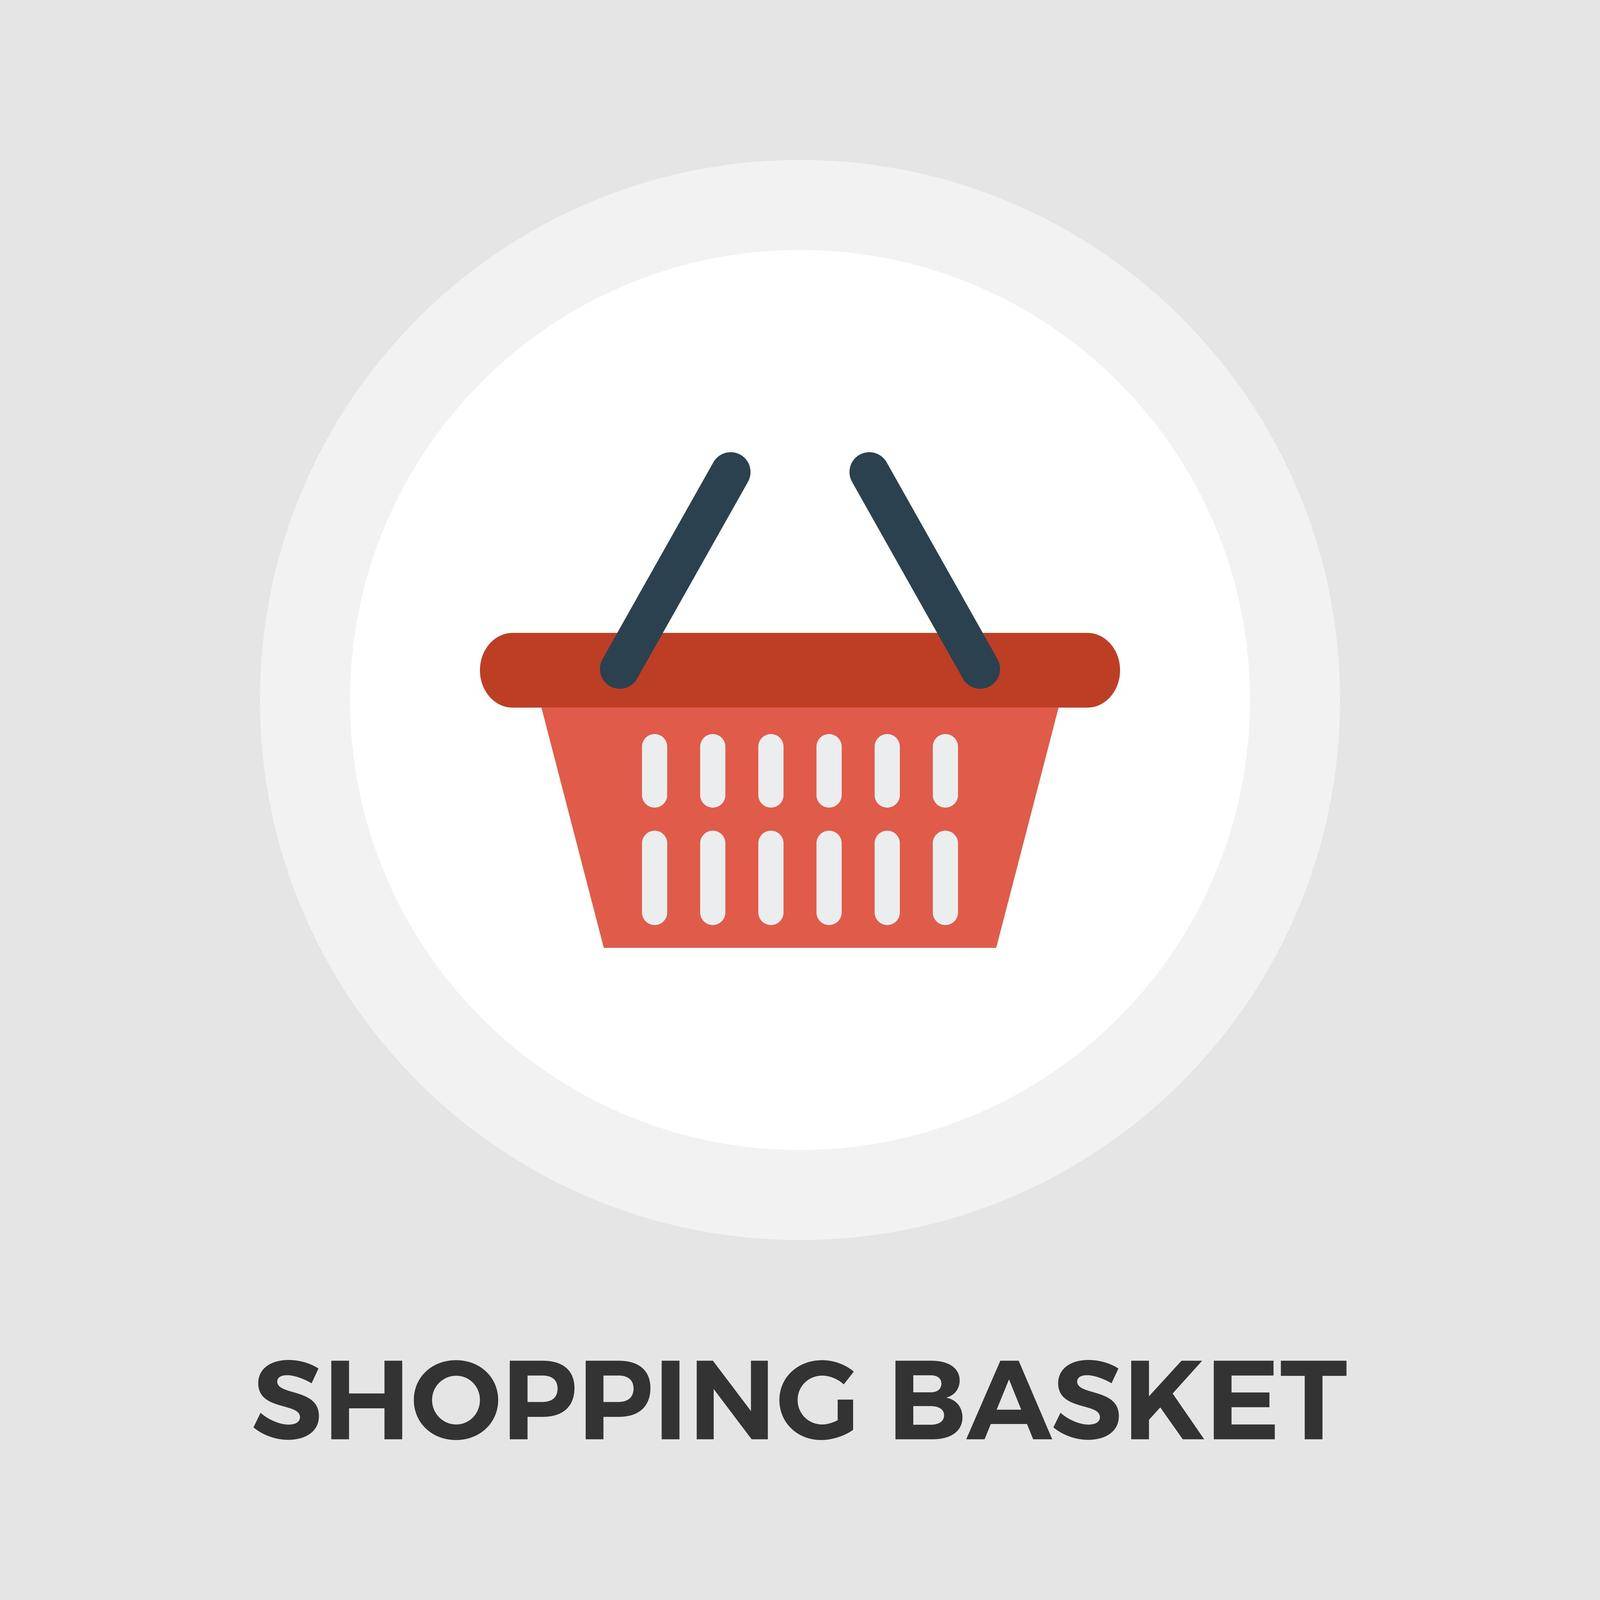 Shopping basket icon vector. Flat icon isolated on the white background. Editable EPS file. Vector illustration.